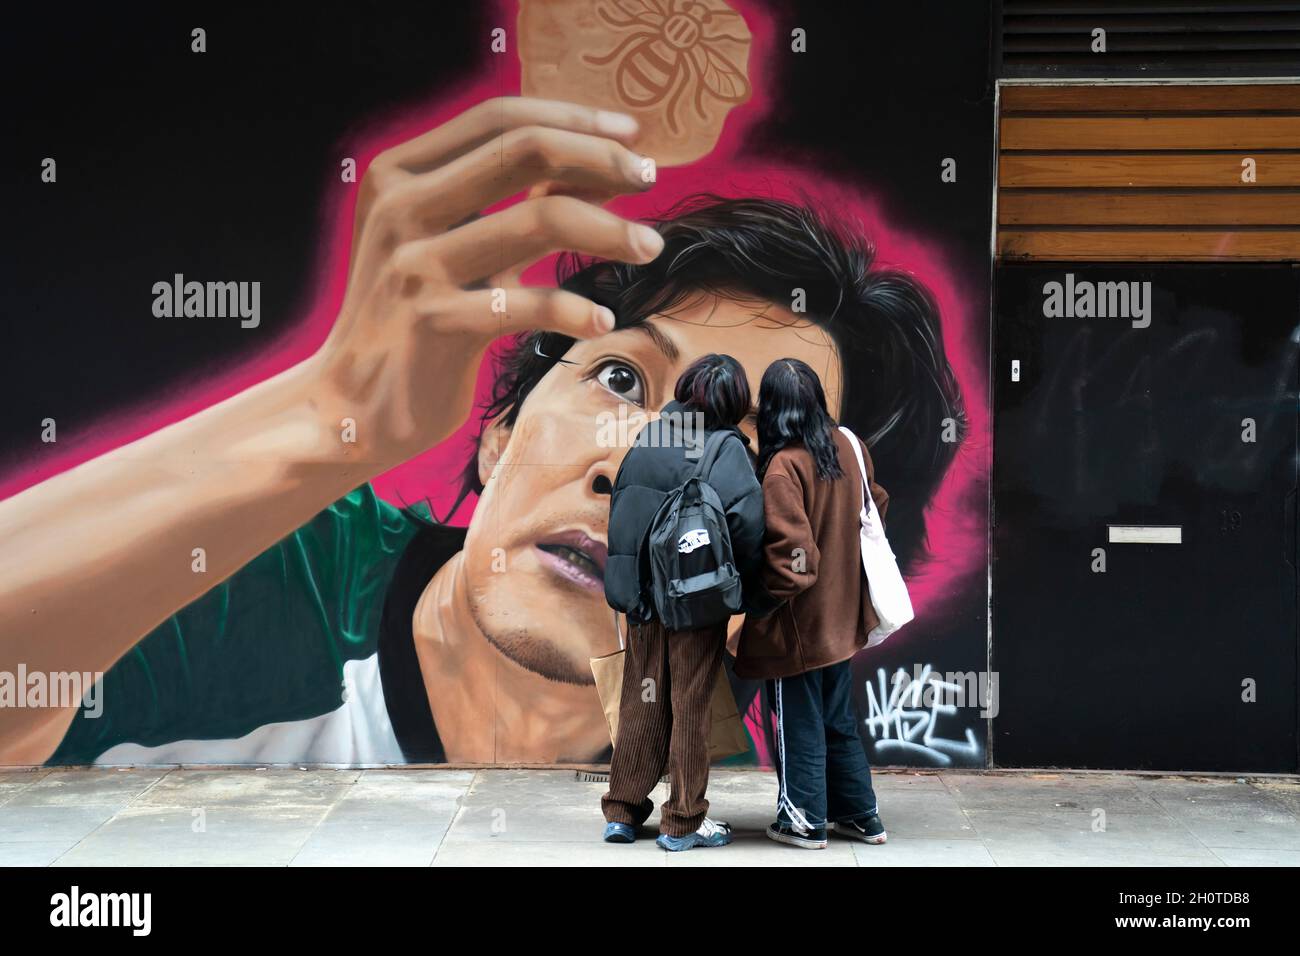 Manchester, UK. 14th October, 2021. A mural by the street artist Akse P19 along the theme of the popular Netflix series Squid Game is seen in Manchester, UK. Credit: Jon Super/Alamy Live News. Stock Photo